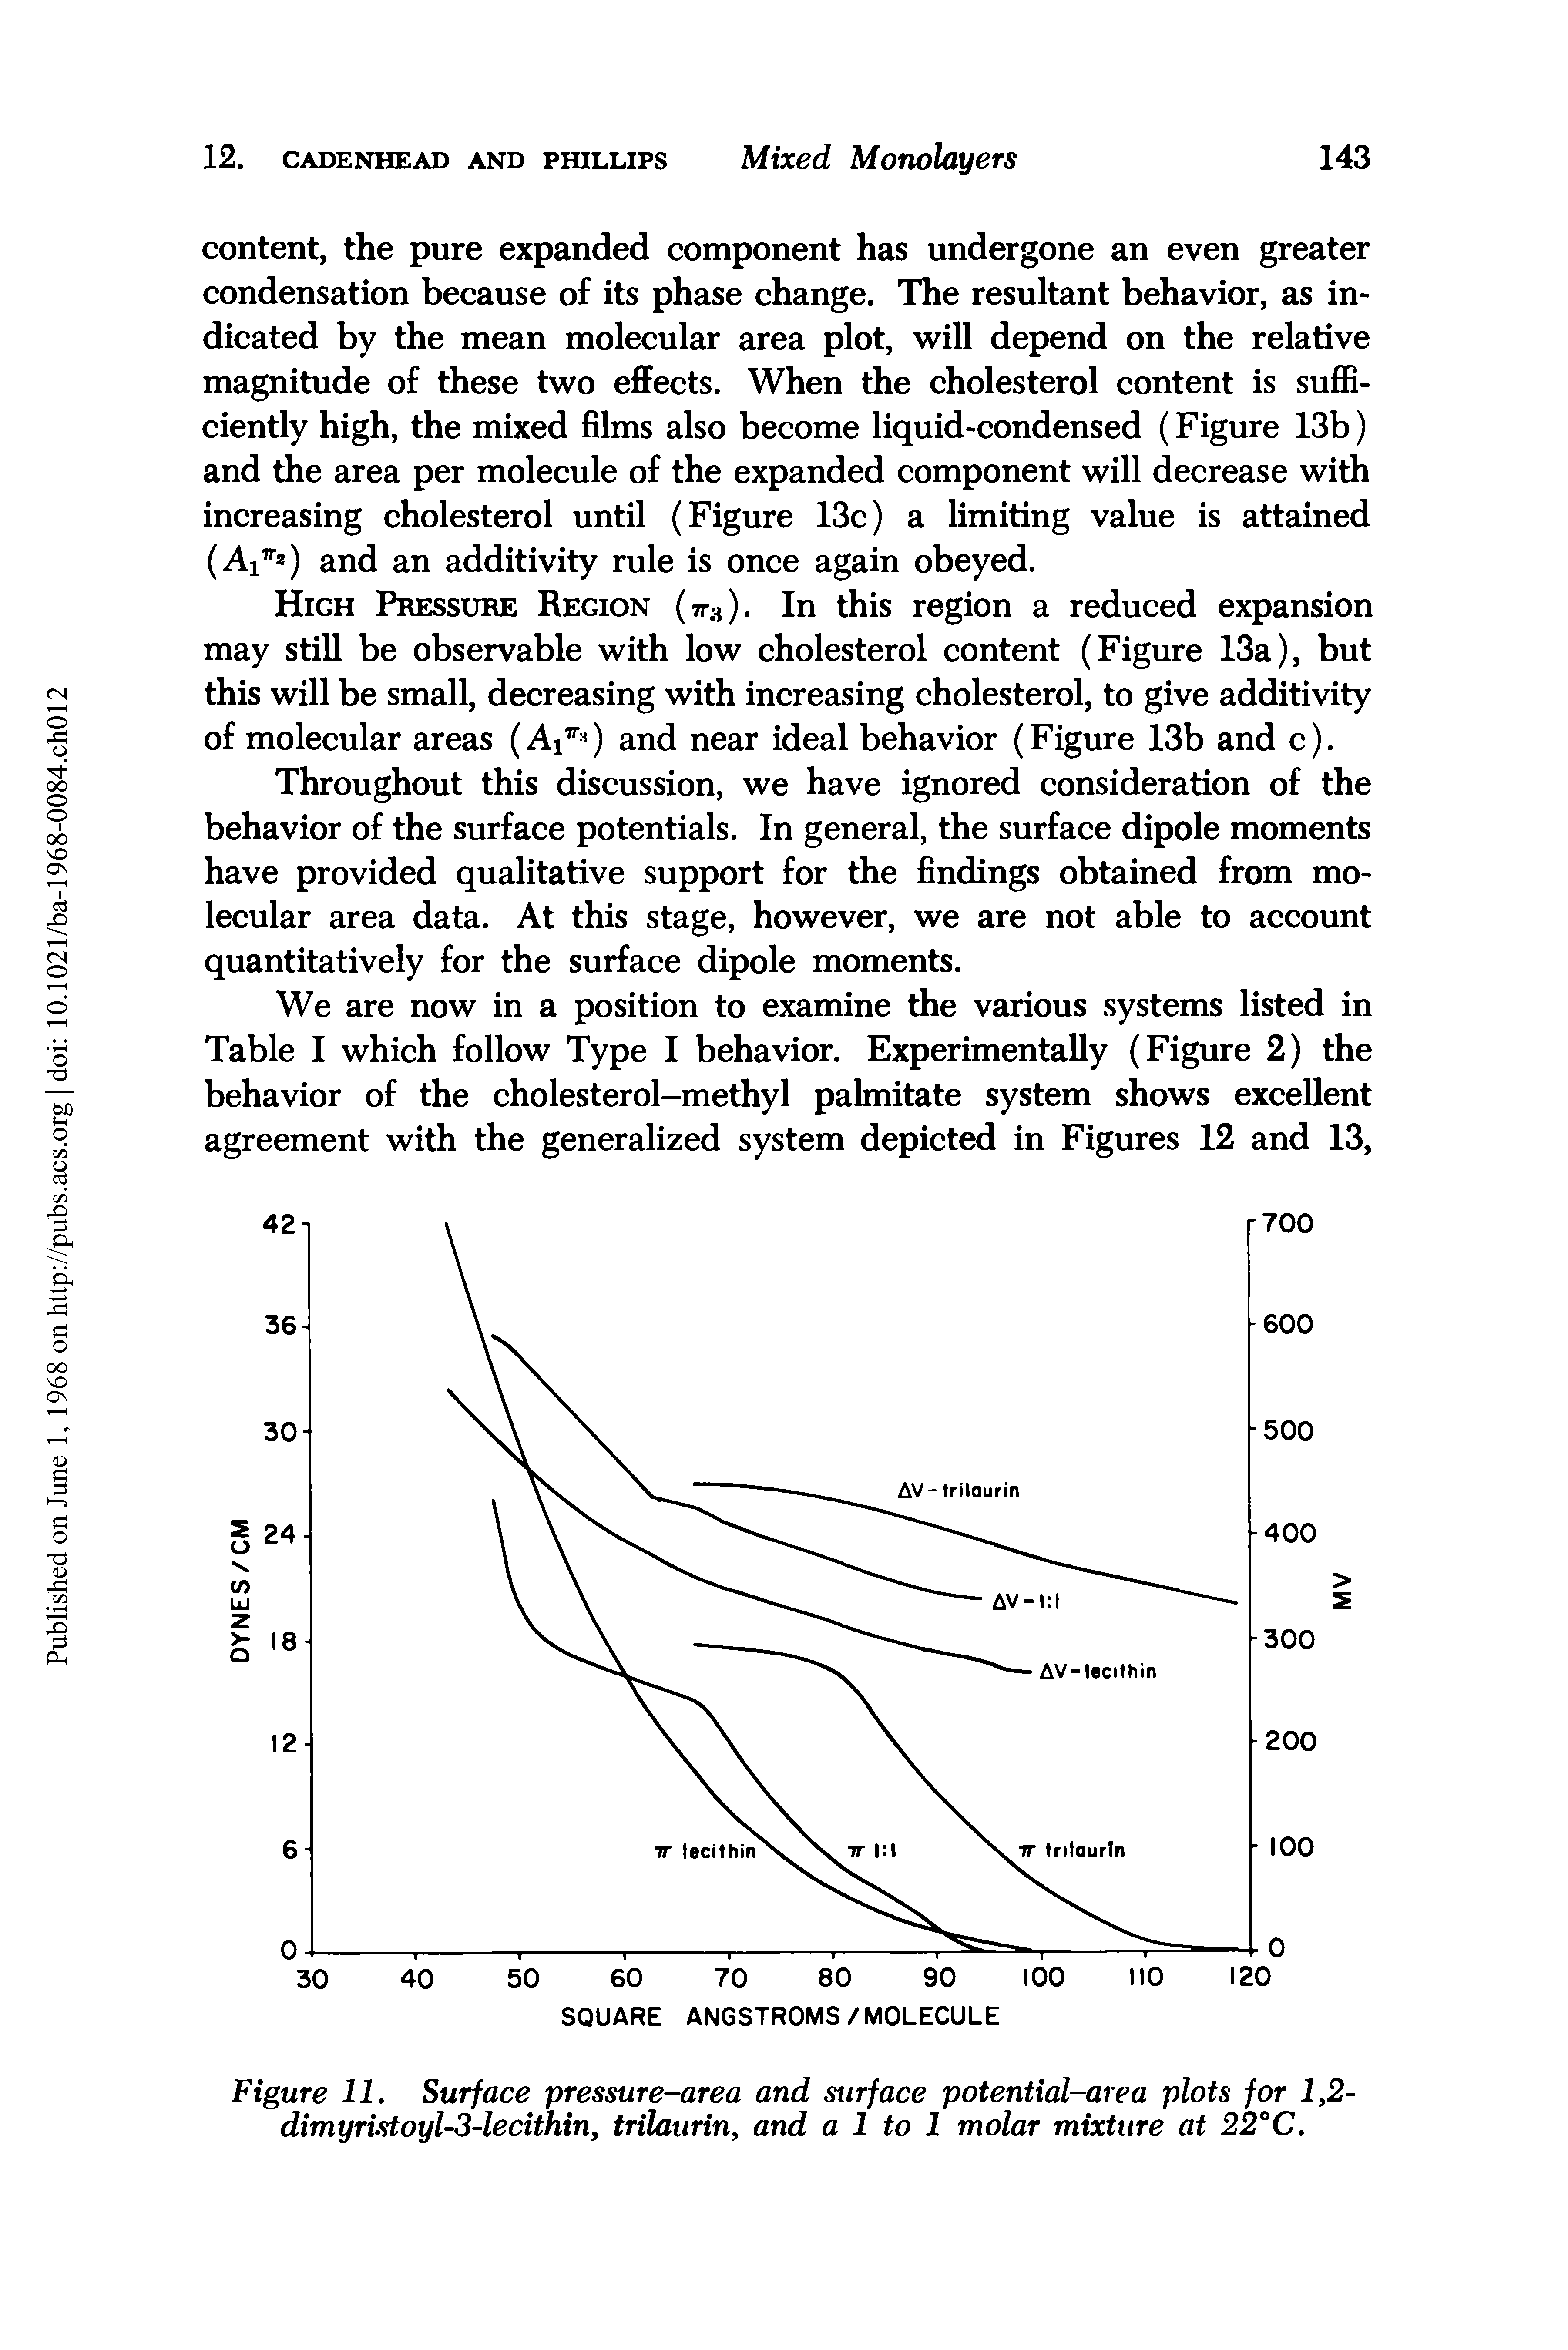 Figure II. Surface pressure-area and surface potential-area plots for 1,2-dimyristoyl-3-lecithin, trilaurin, and a 1 to 1 molar mixture at 22°C.